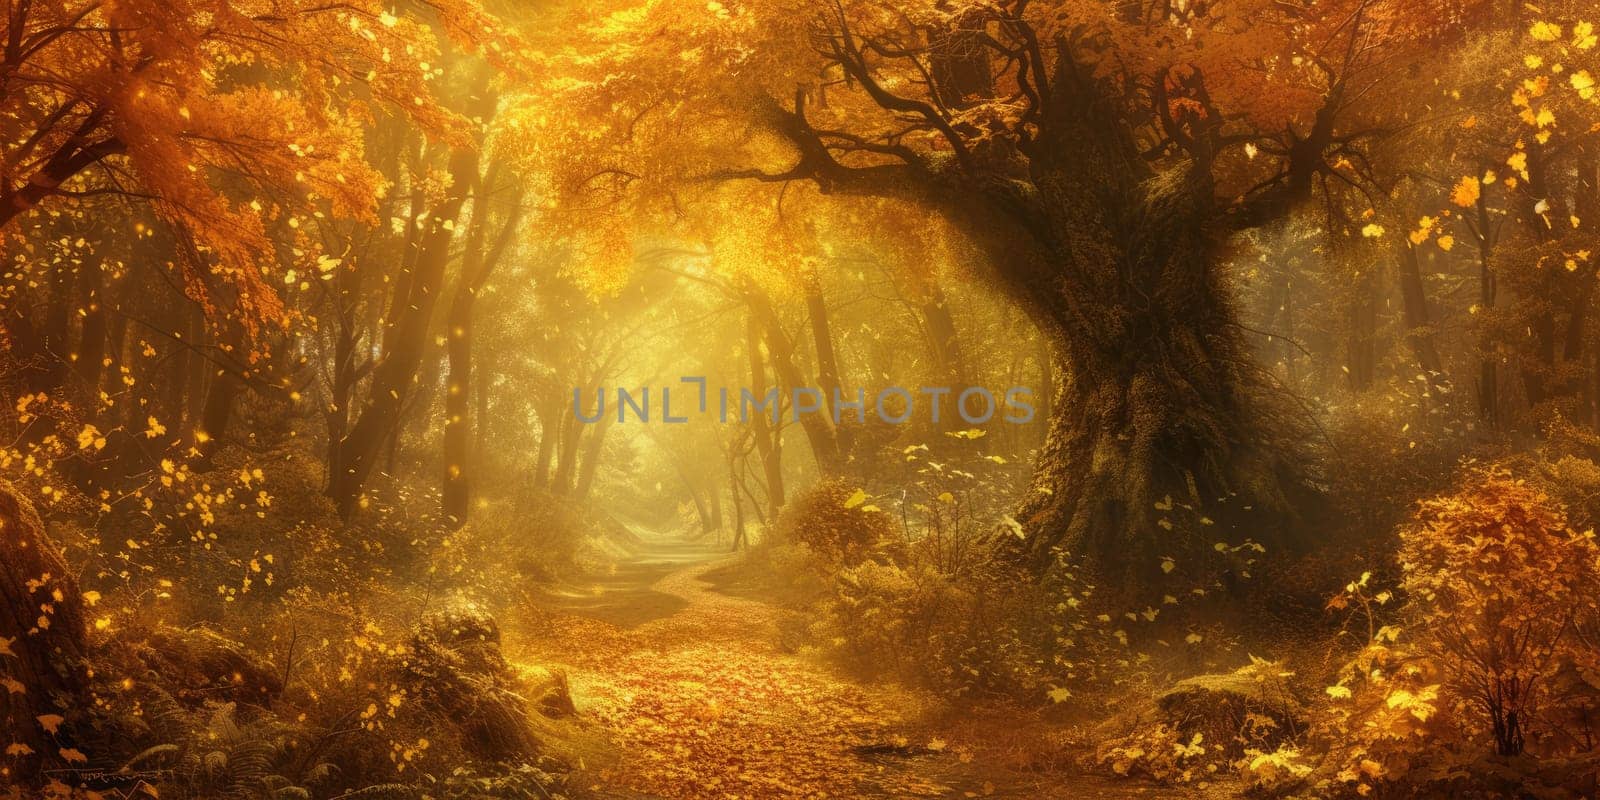 An enchanted forest in autumn, filled with golden leaves. Resplendent. by biancoblue